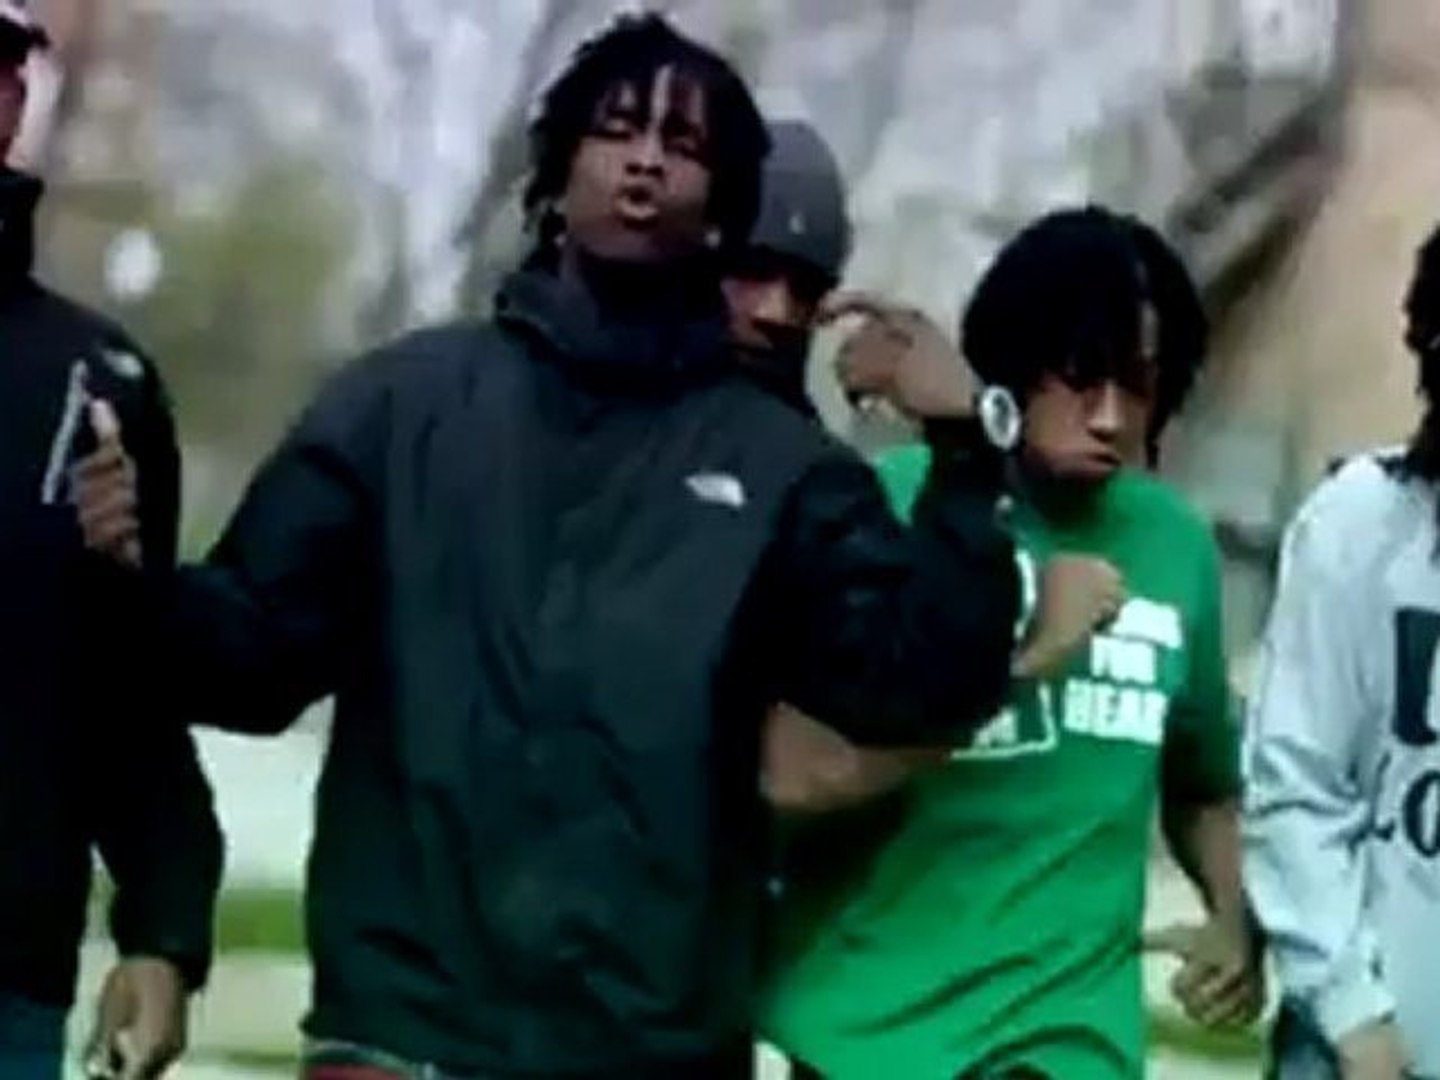 Chief Keef - -Everyday- - Shot by @DGainzBeats - video Dailymotion